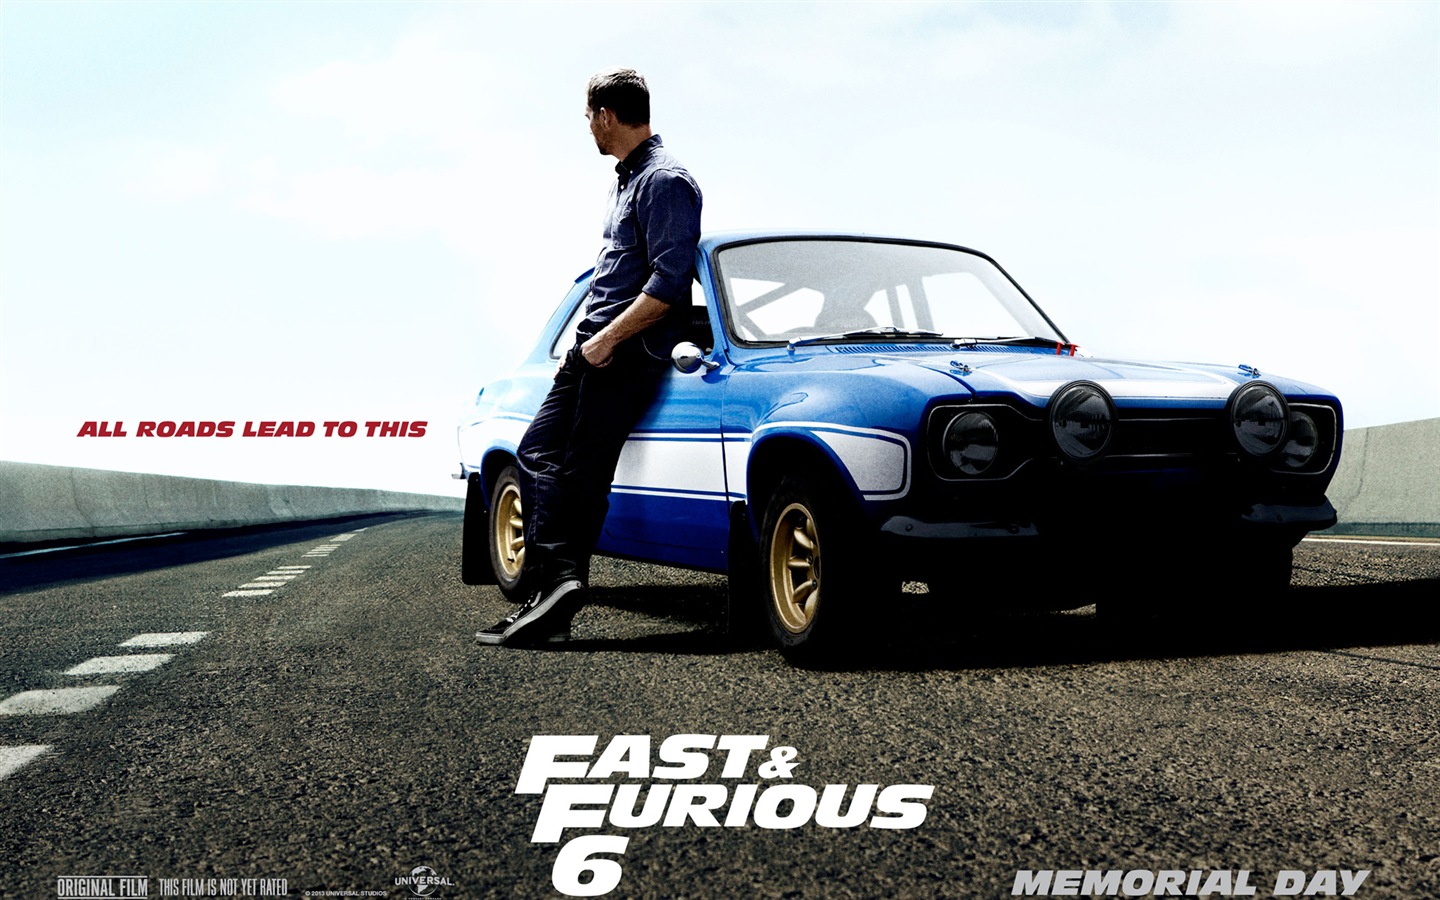 Fast And Furious 6 HD movie wallpapers #10 - 1440x900